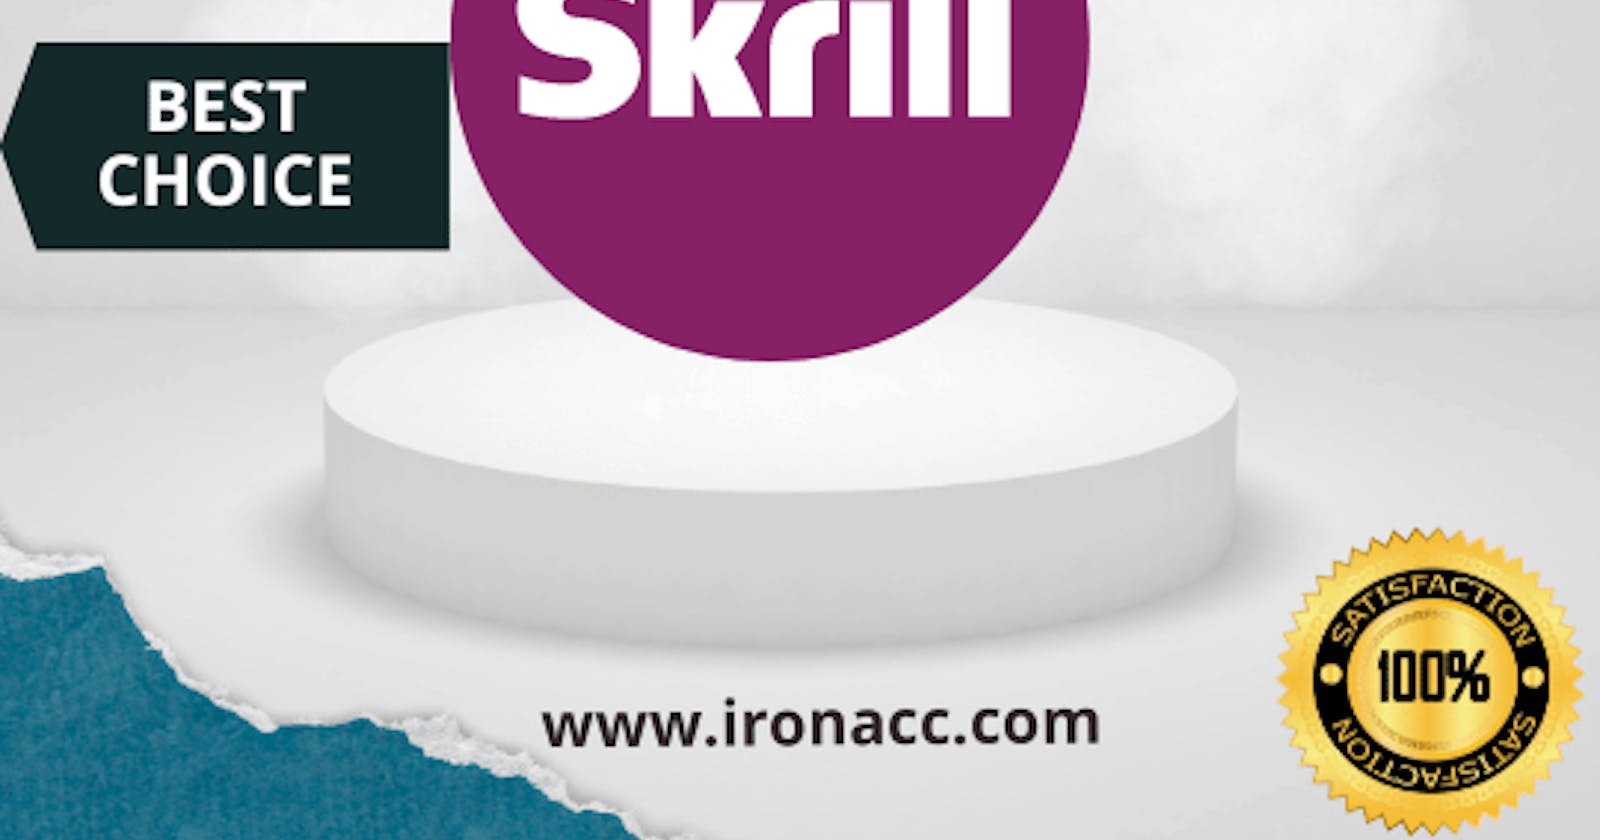 Unlock a World of E-commerce Opportunities with a Verified Skrill Account